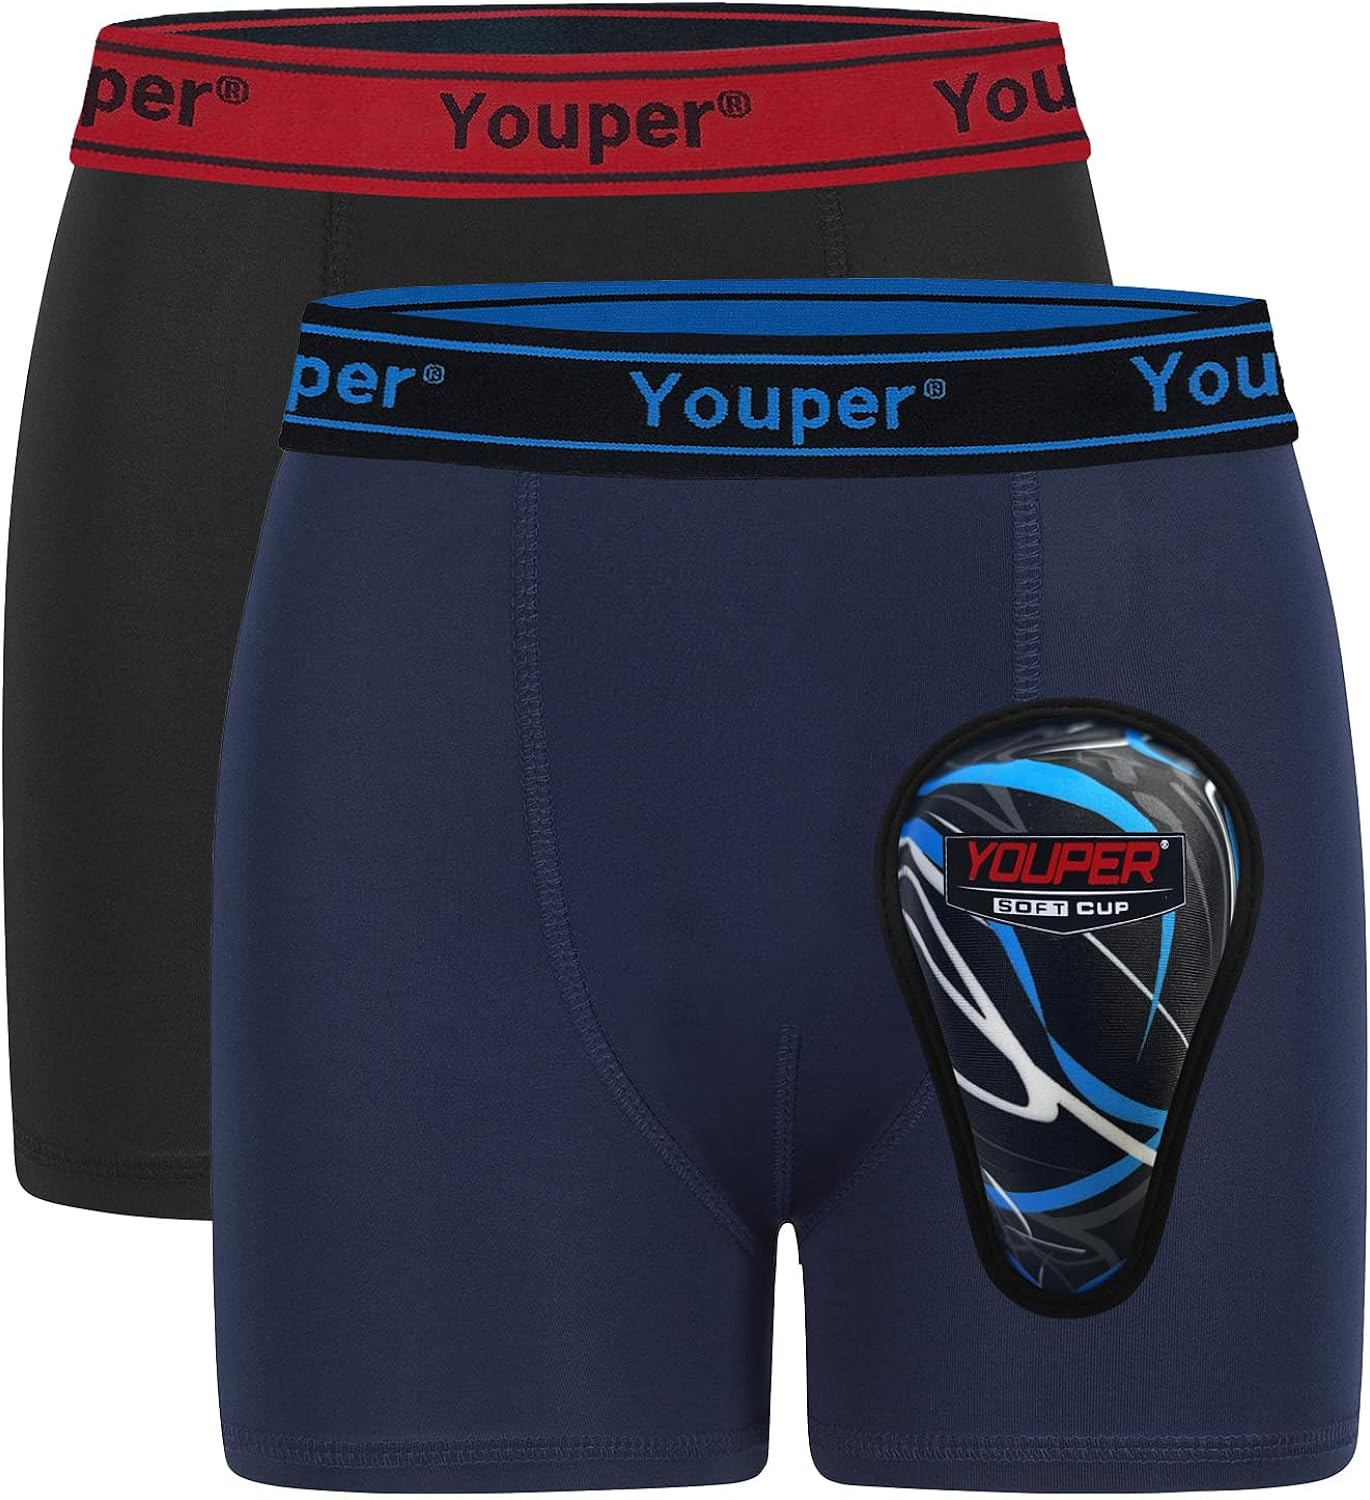 Youper Boys Compression Brief with Soft Protective Macao